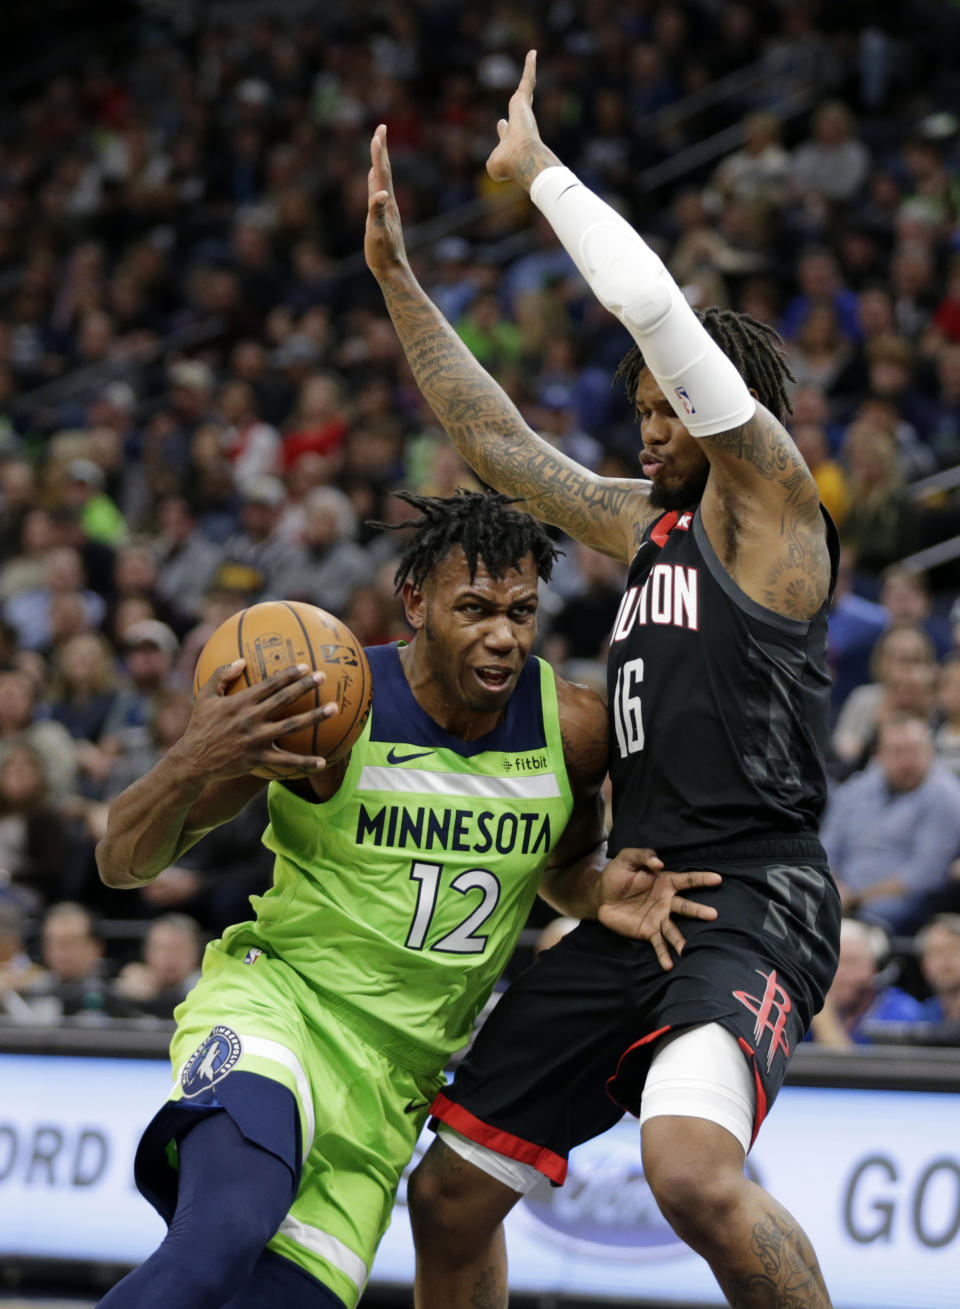 Minnesota Timberwolves guard Trevion Graham (12) drives on Houston Rockets guard Ben McLemore (16) in the first quarter during an NBA basketball game Saturday, Nov. 16, 2019 in Minneapolis. (AP Photo/Andy Clayton- King)